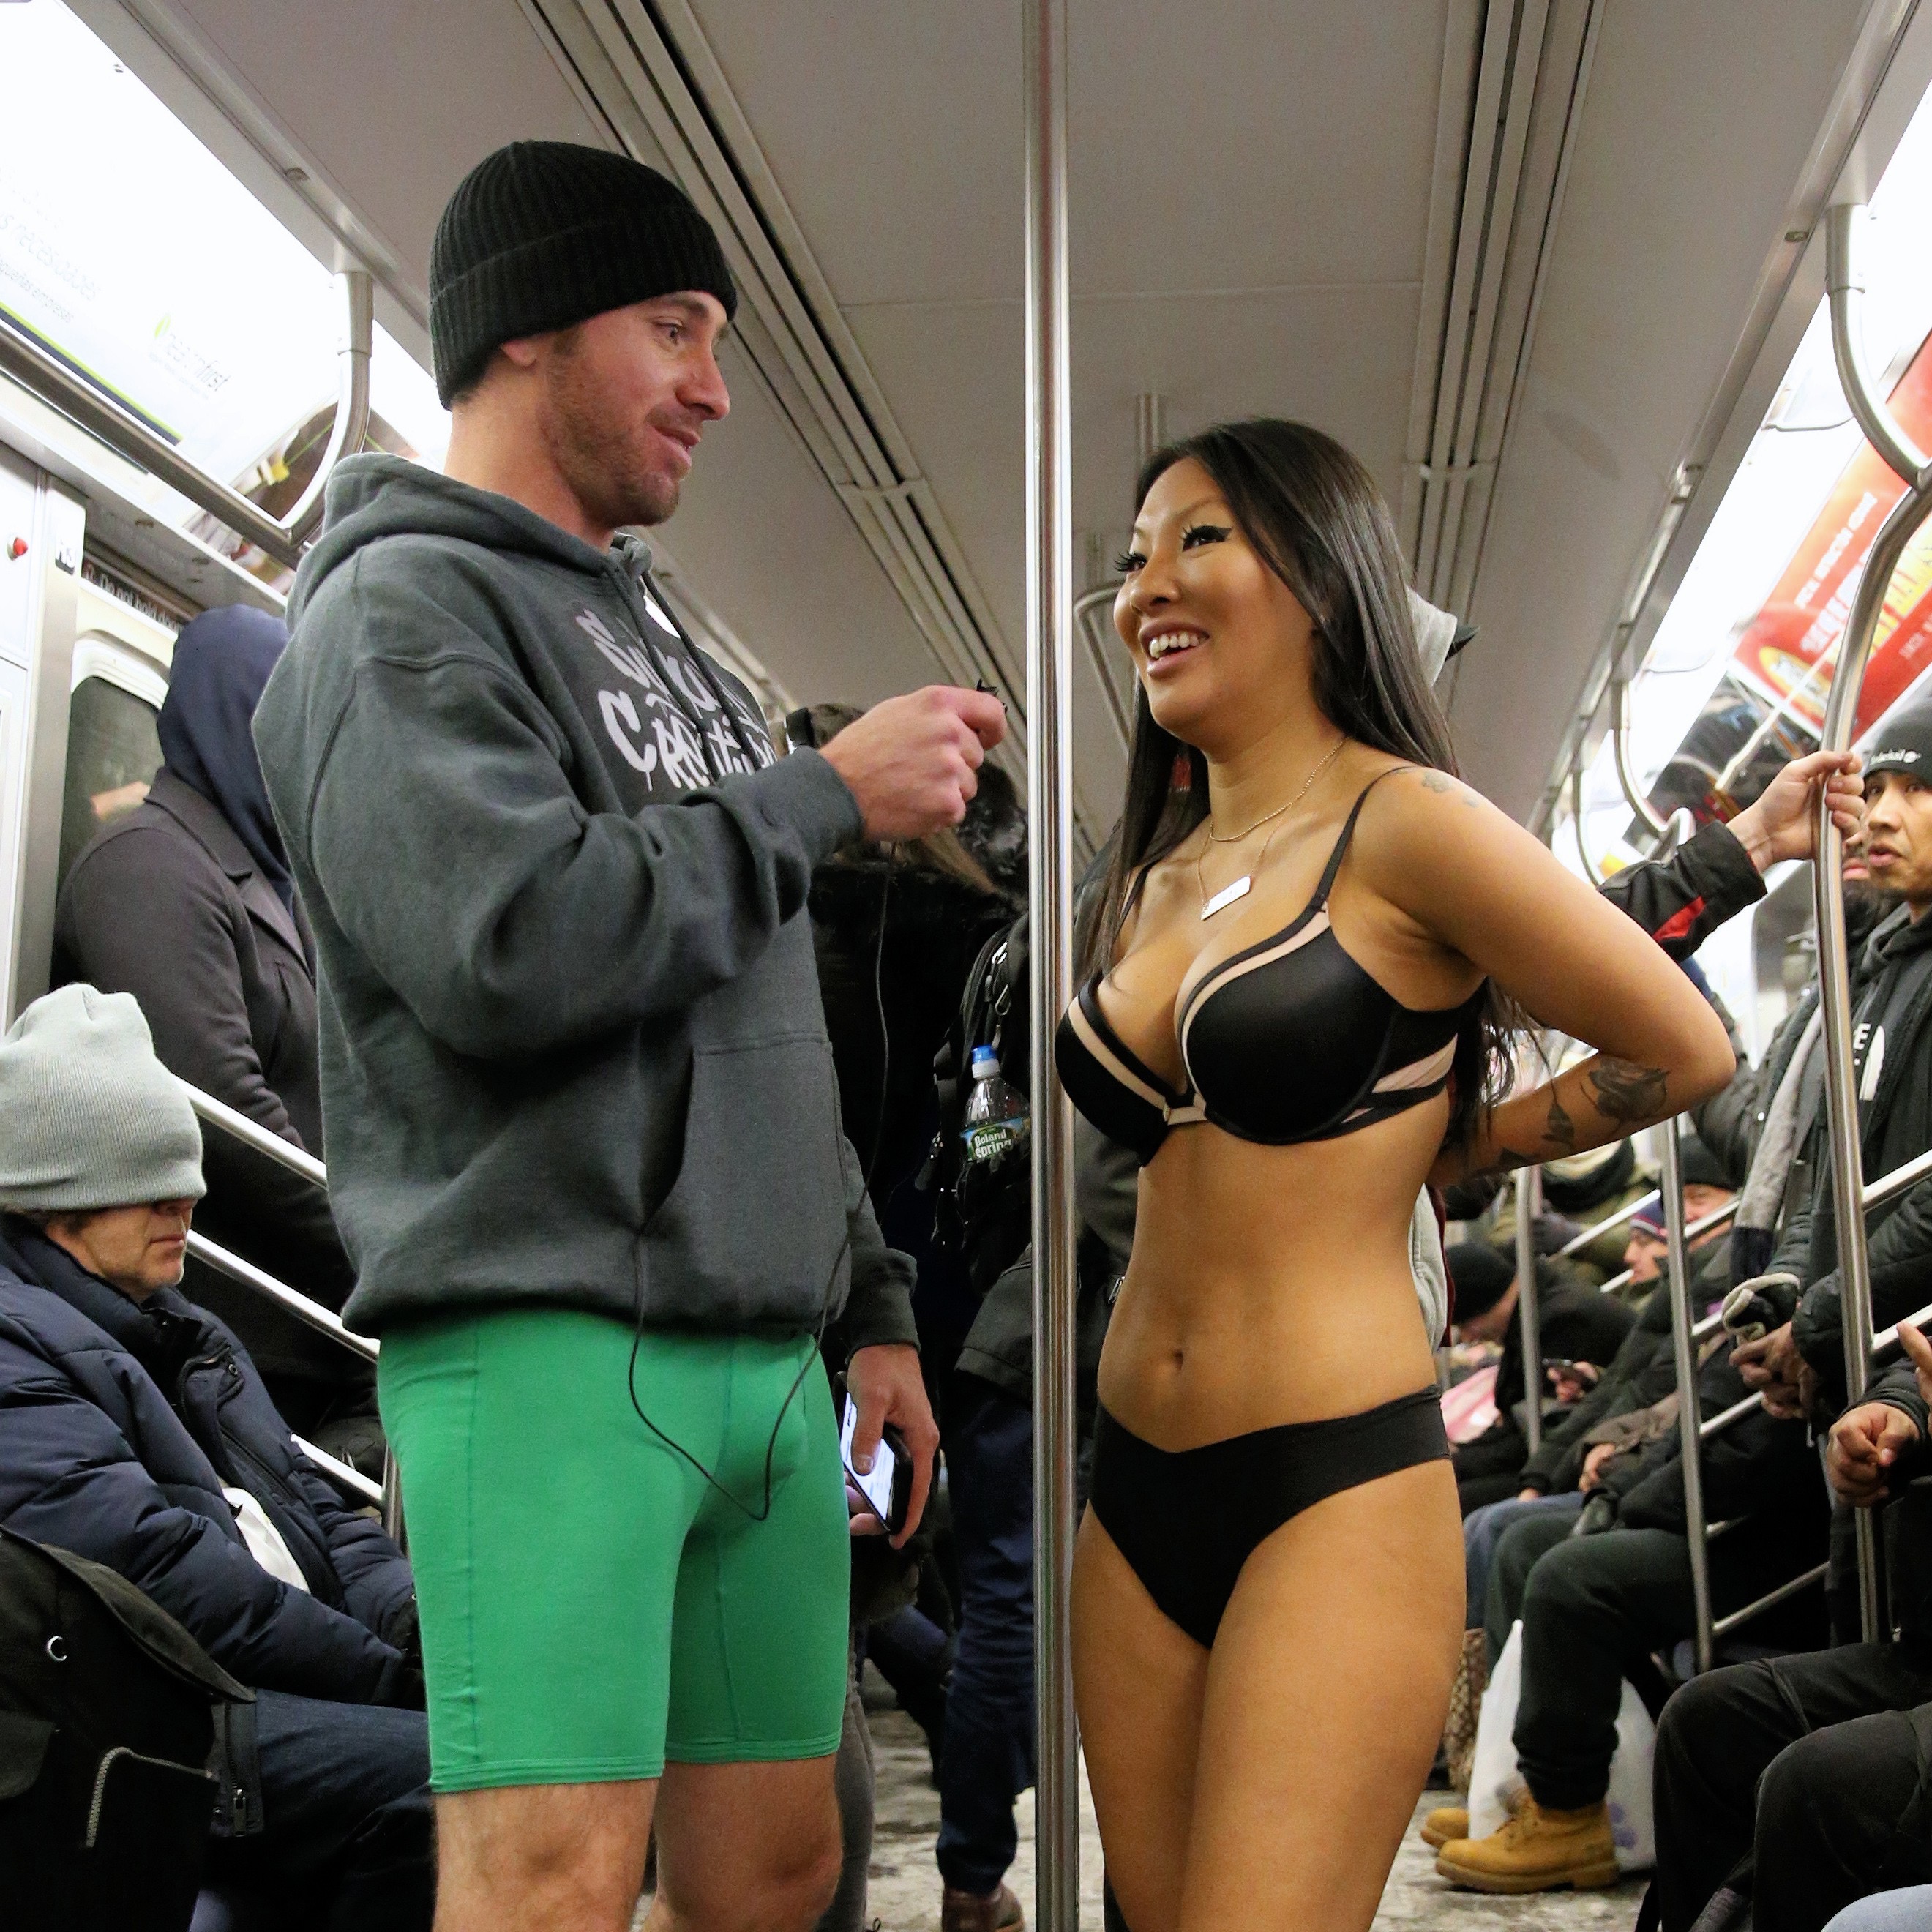 Asa Akira stealing the show as she appears topless in public.